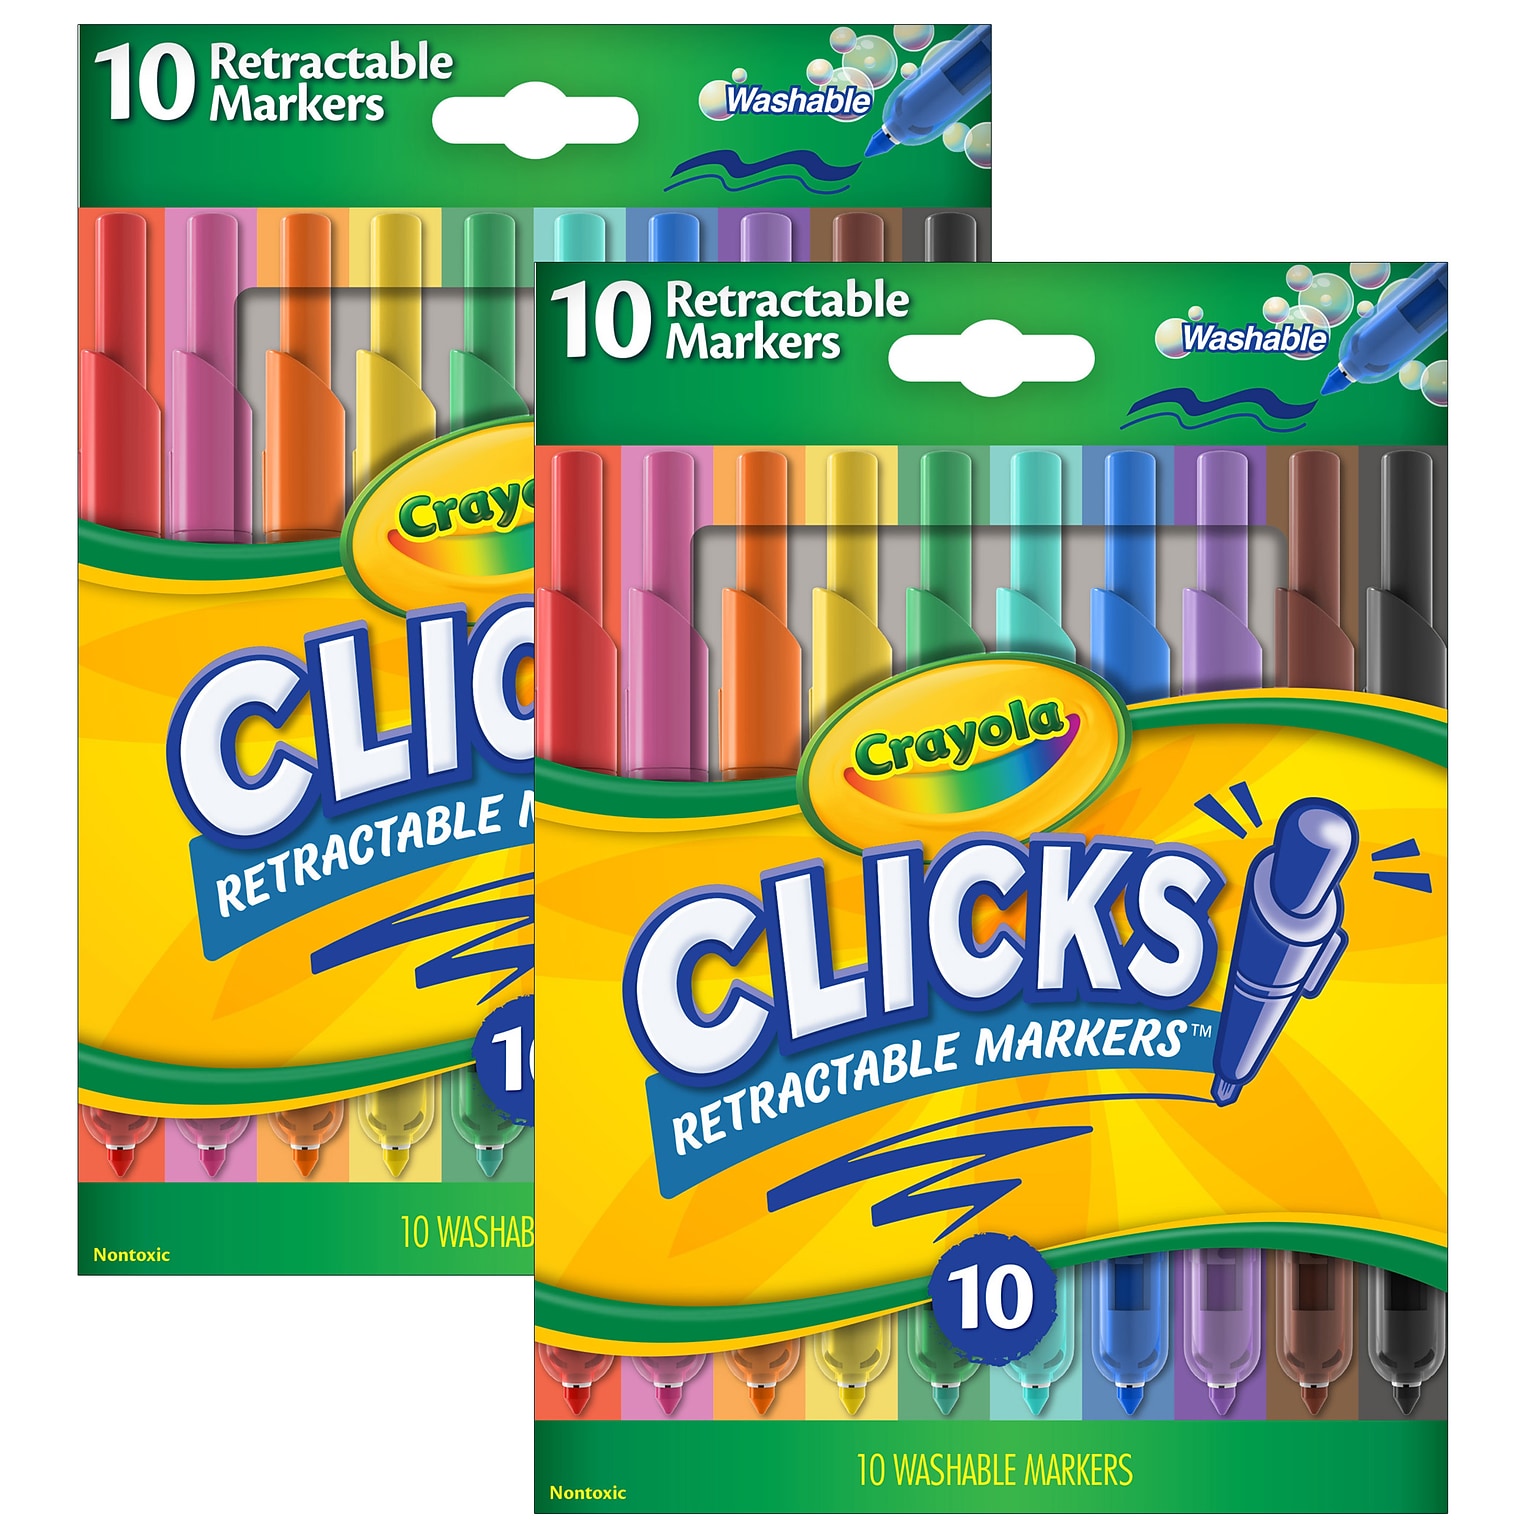 Crayola® CLICKS Washable Retractable Markers, Conical Tips, 10 Assorted Colors, 2 Packs (BIN588370-2)